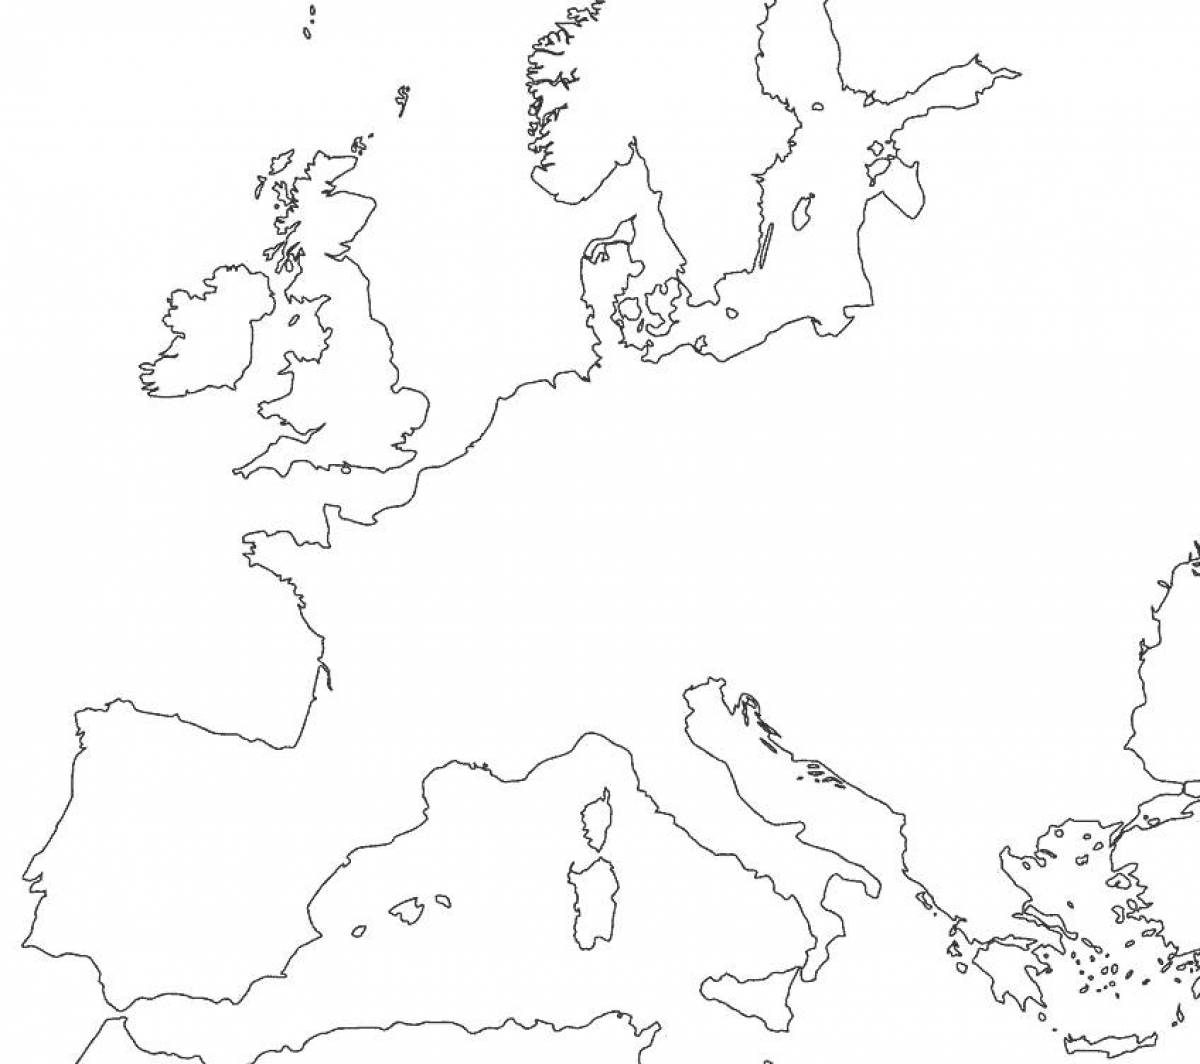 Attractive map of europe